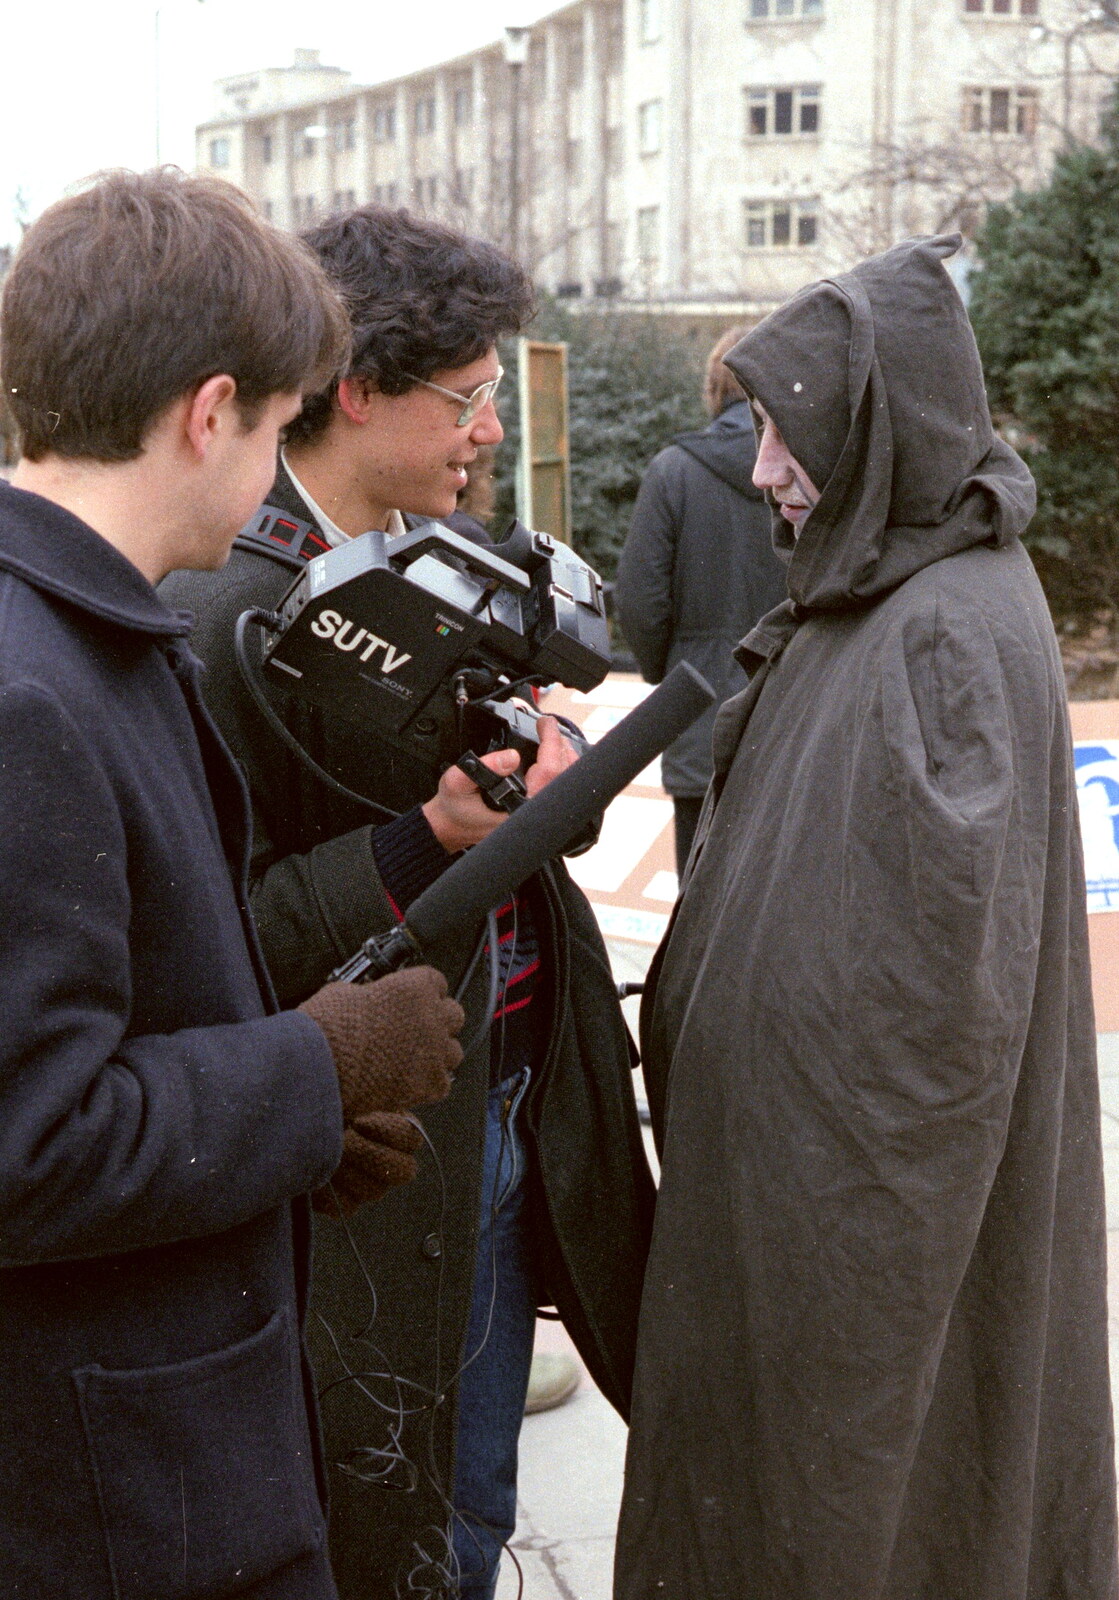 Students' Union Television interviews Death from Uni: A Van Gogh Grant Cuts Protest, Plymouth, Devon - 1st March 1986